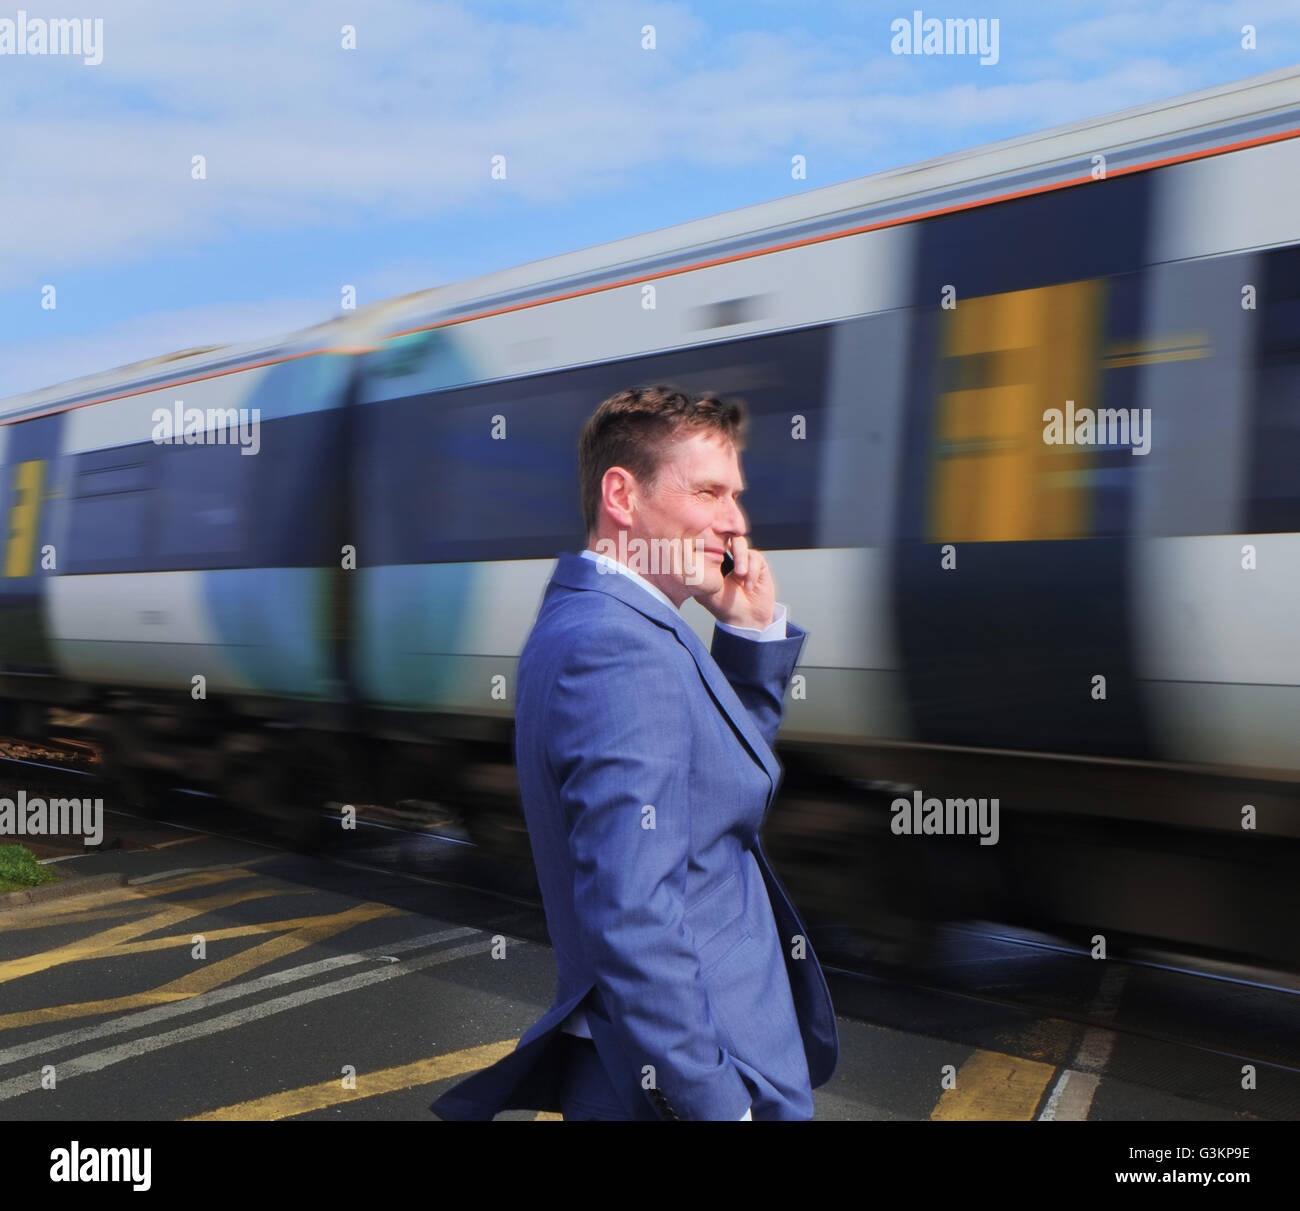 Businessman standing at level crossing, using smartphone Stock Photo